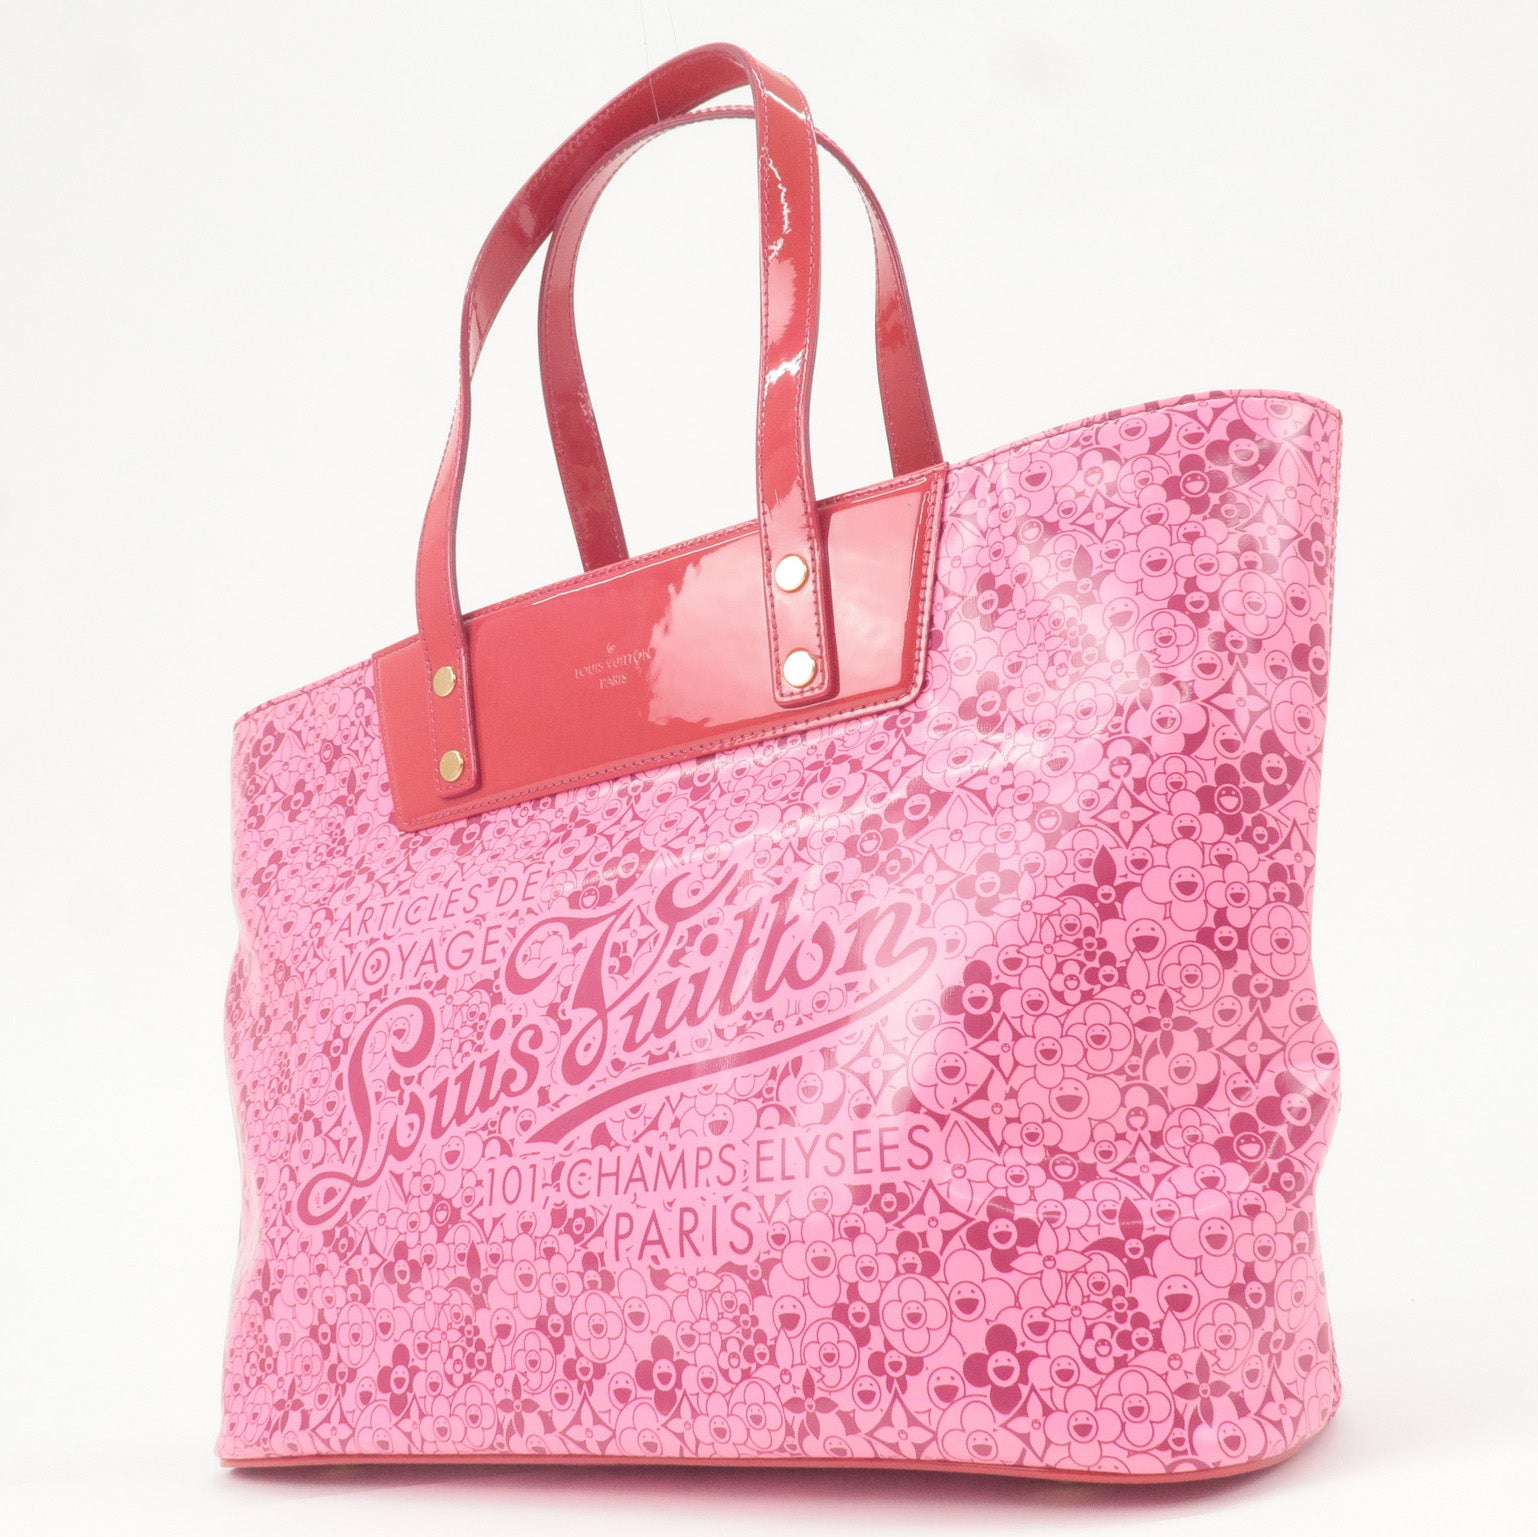 LOUIS VUITTON Cosmic Blossom PM Tote Bag Rose 702566